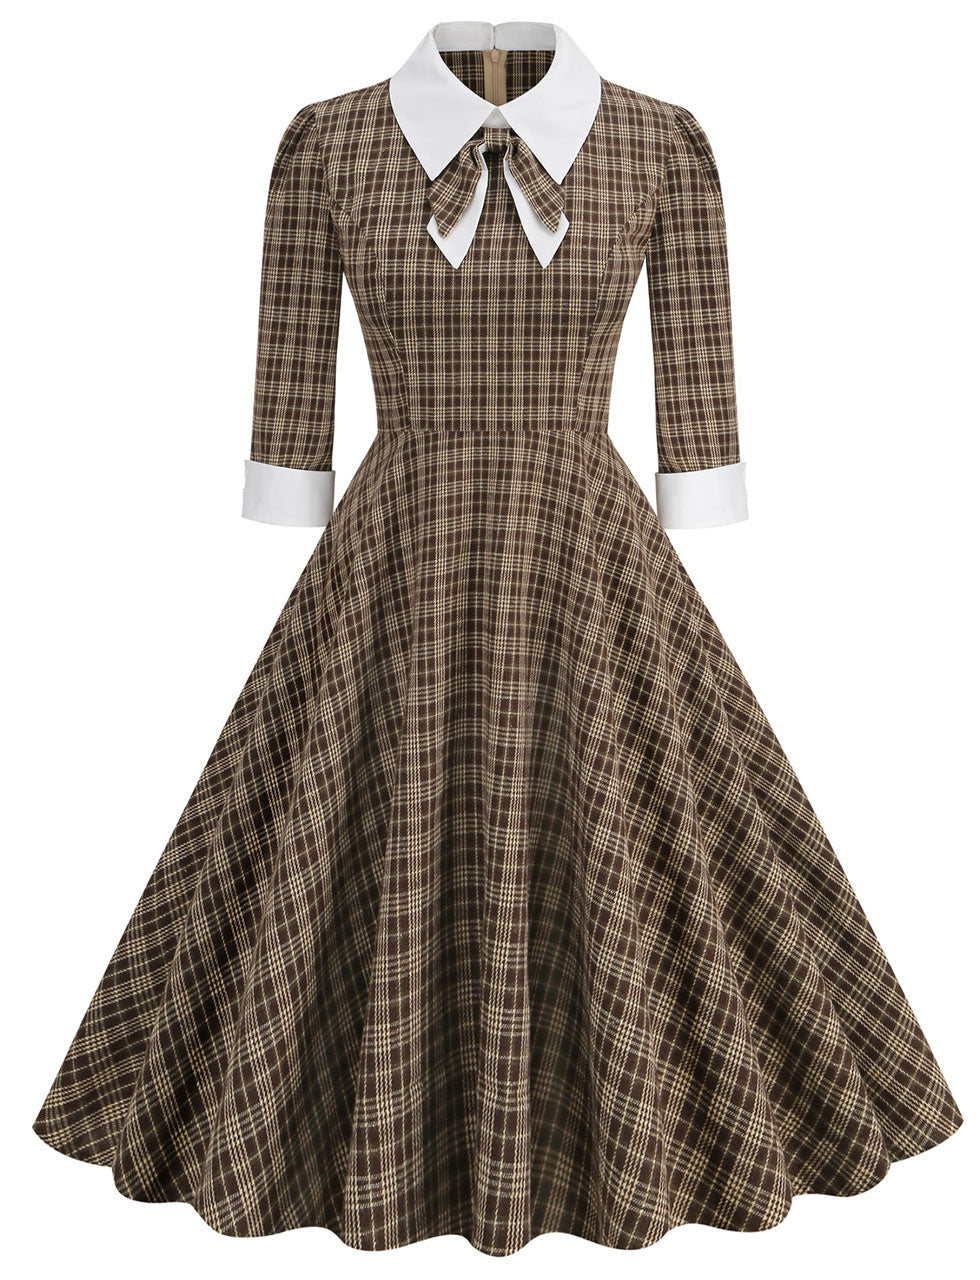 Big BowKnot Brown Plaid 3/4 Sleeve 1950S Vintage Dress Inspired By Mrs. Maisel